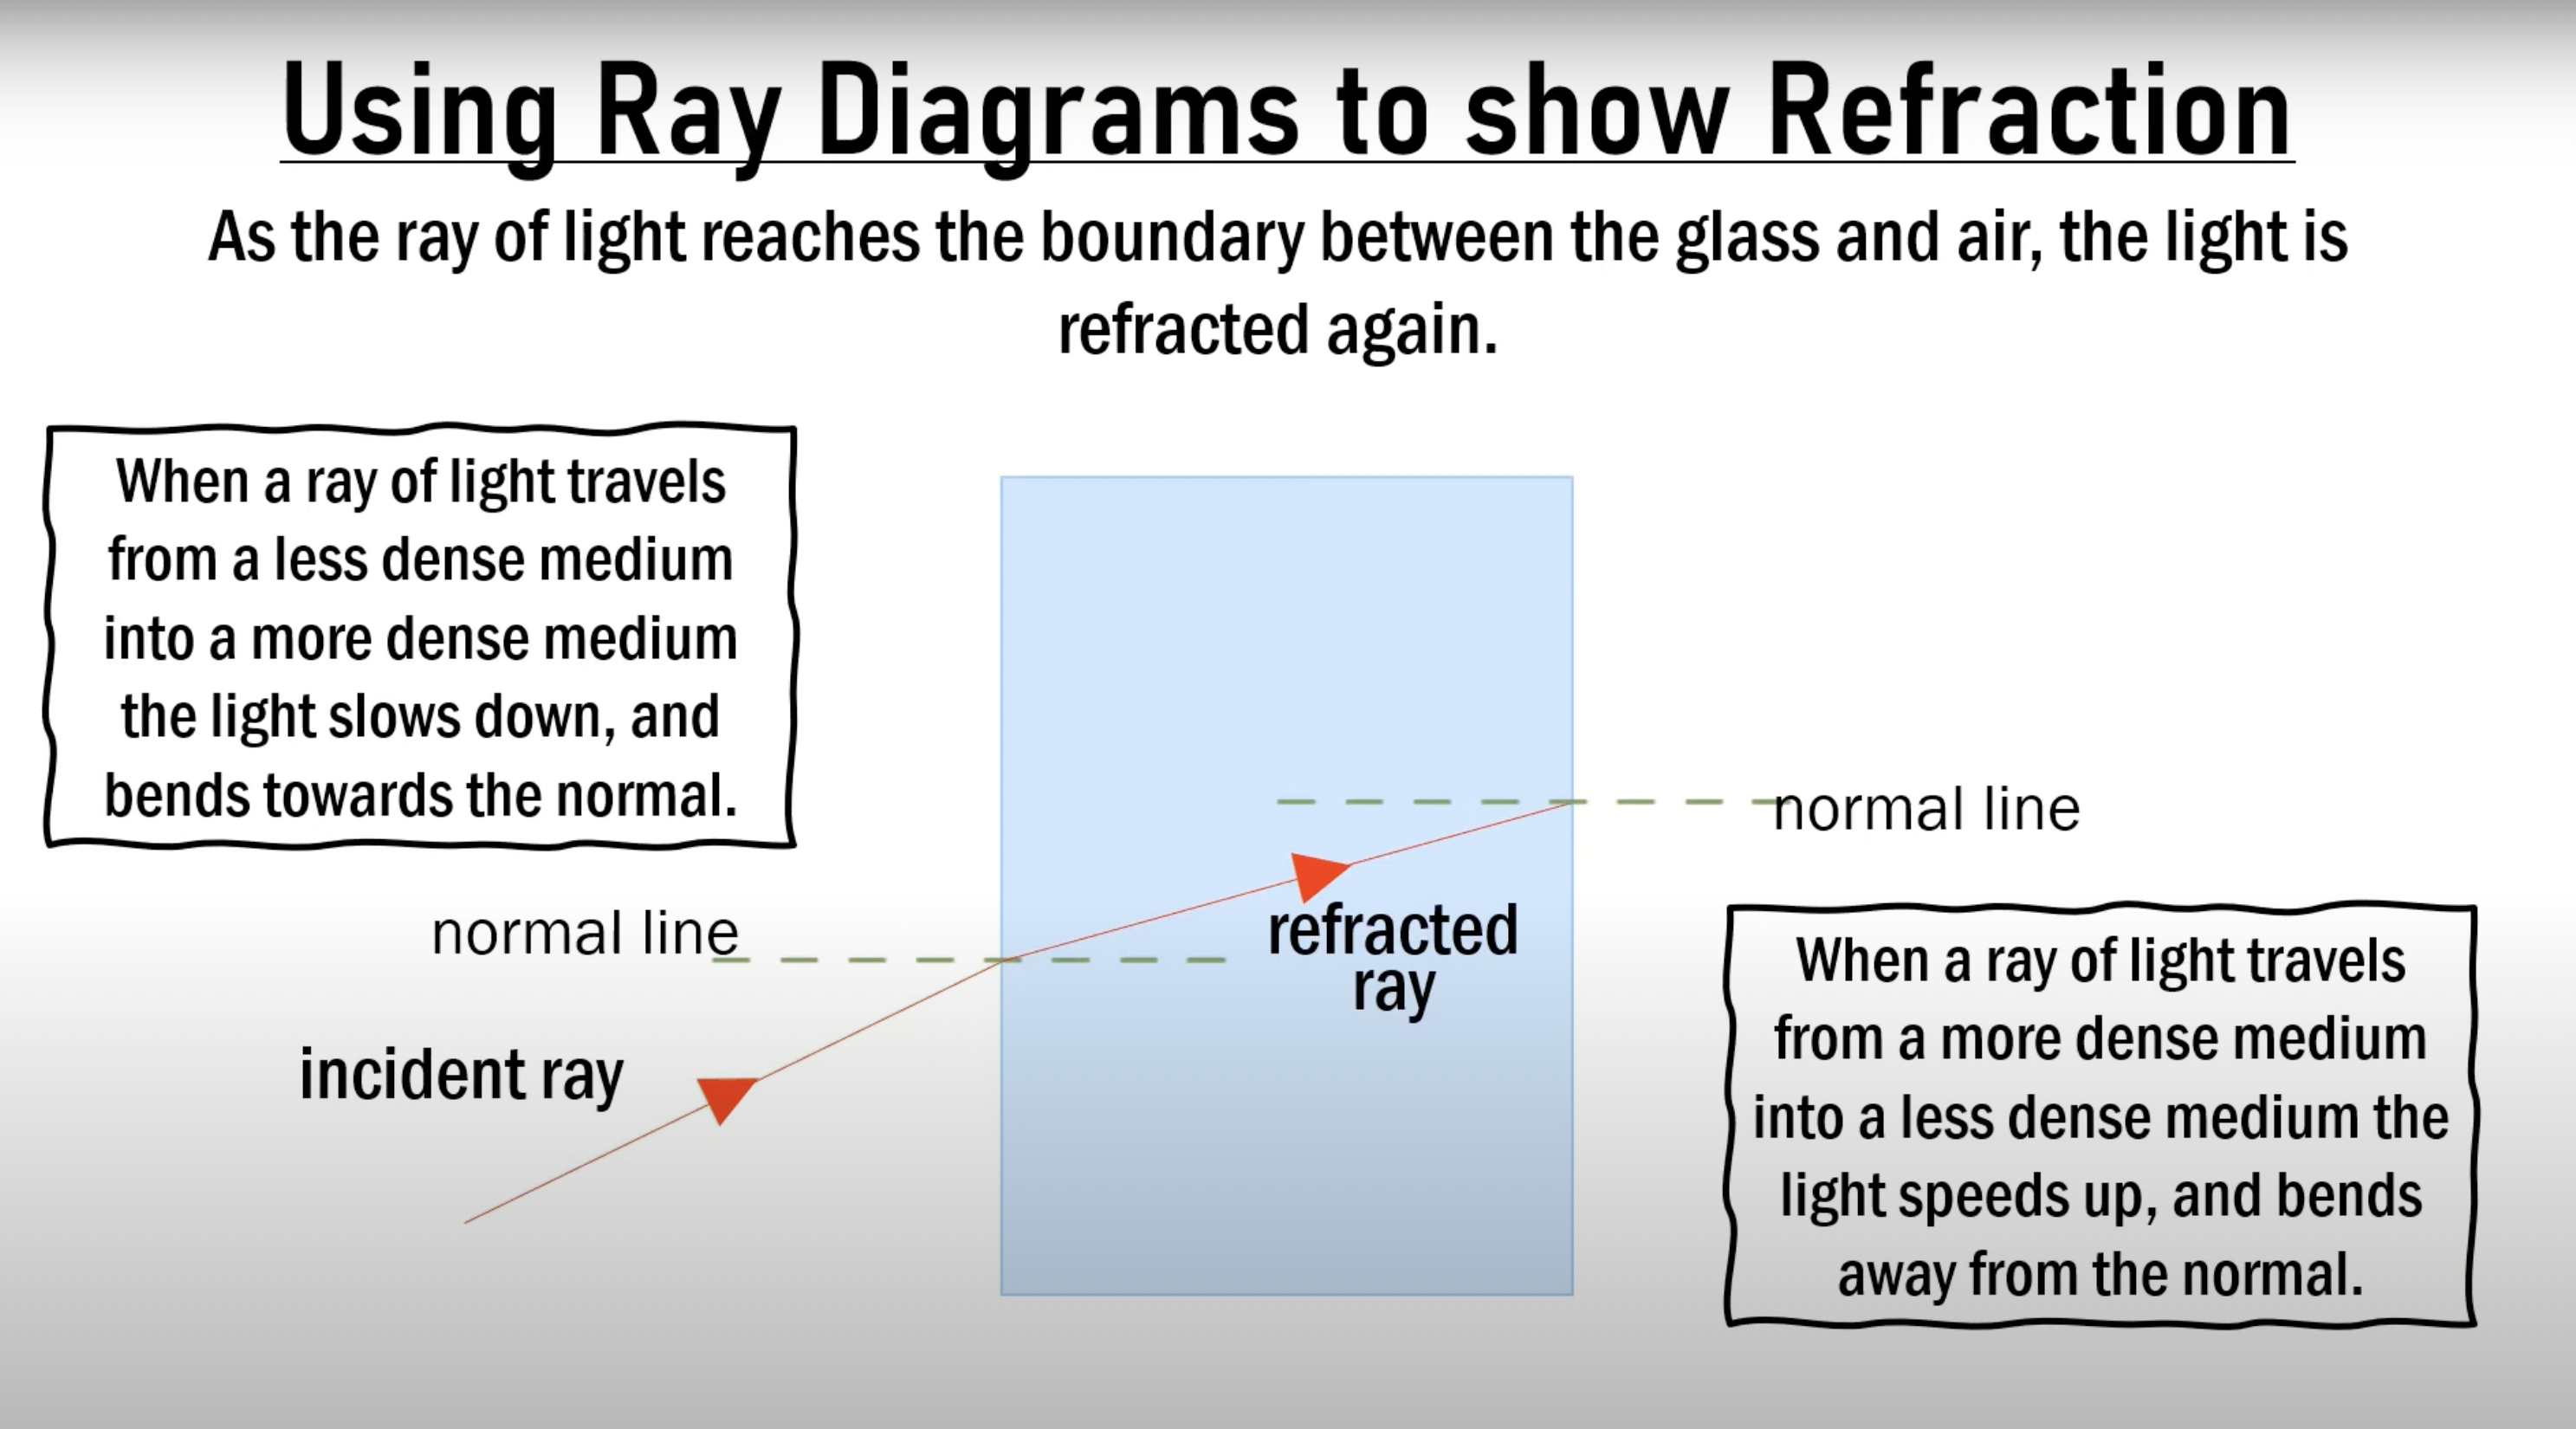 <p>An emergent ray refers to a ray of light that has undergone transmission through a boundary between two different mediums. It is the ray that emerges or comes out from the boundary after interacting with the interface.</p><p>The emergent ray may experience changes in direction and other properties depending on the angle of incidence and the properties of the mediums involved.</p>